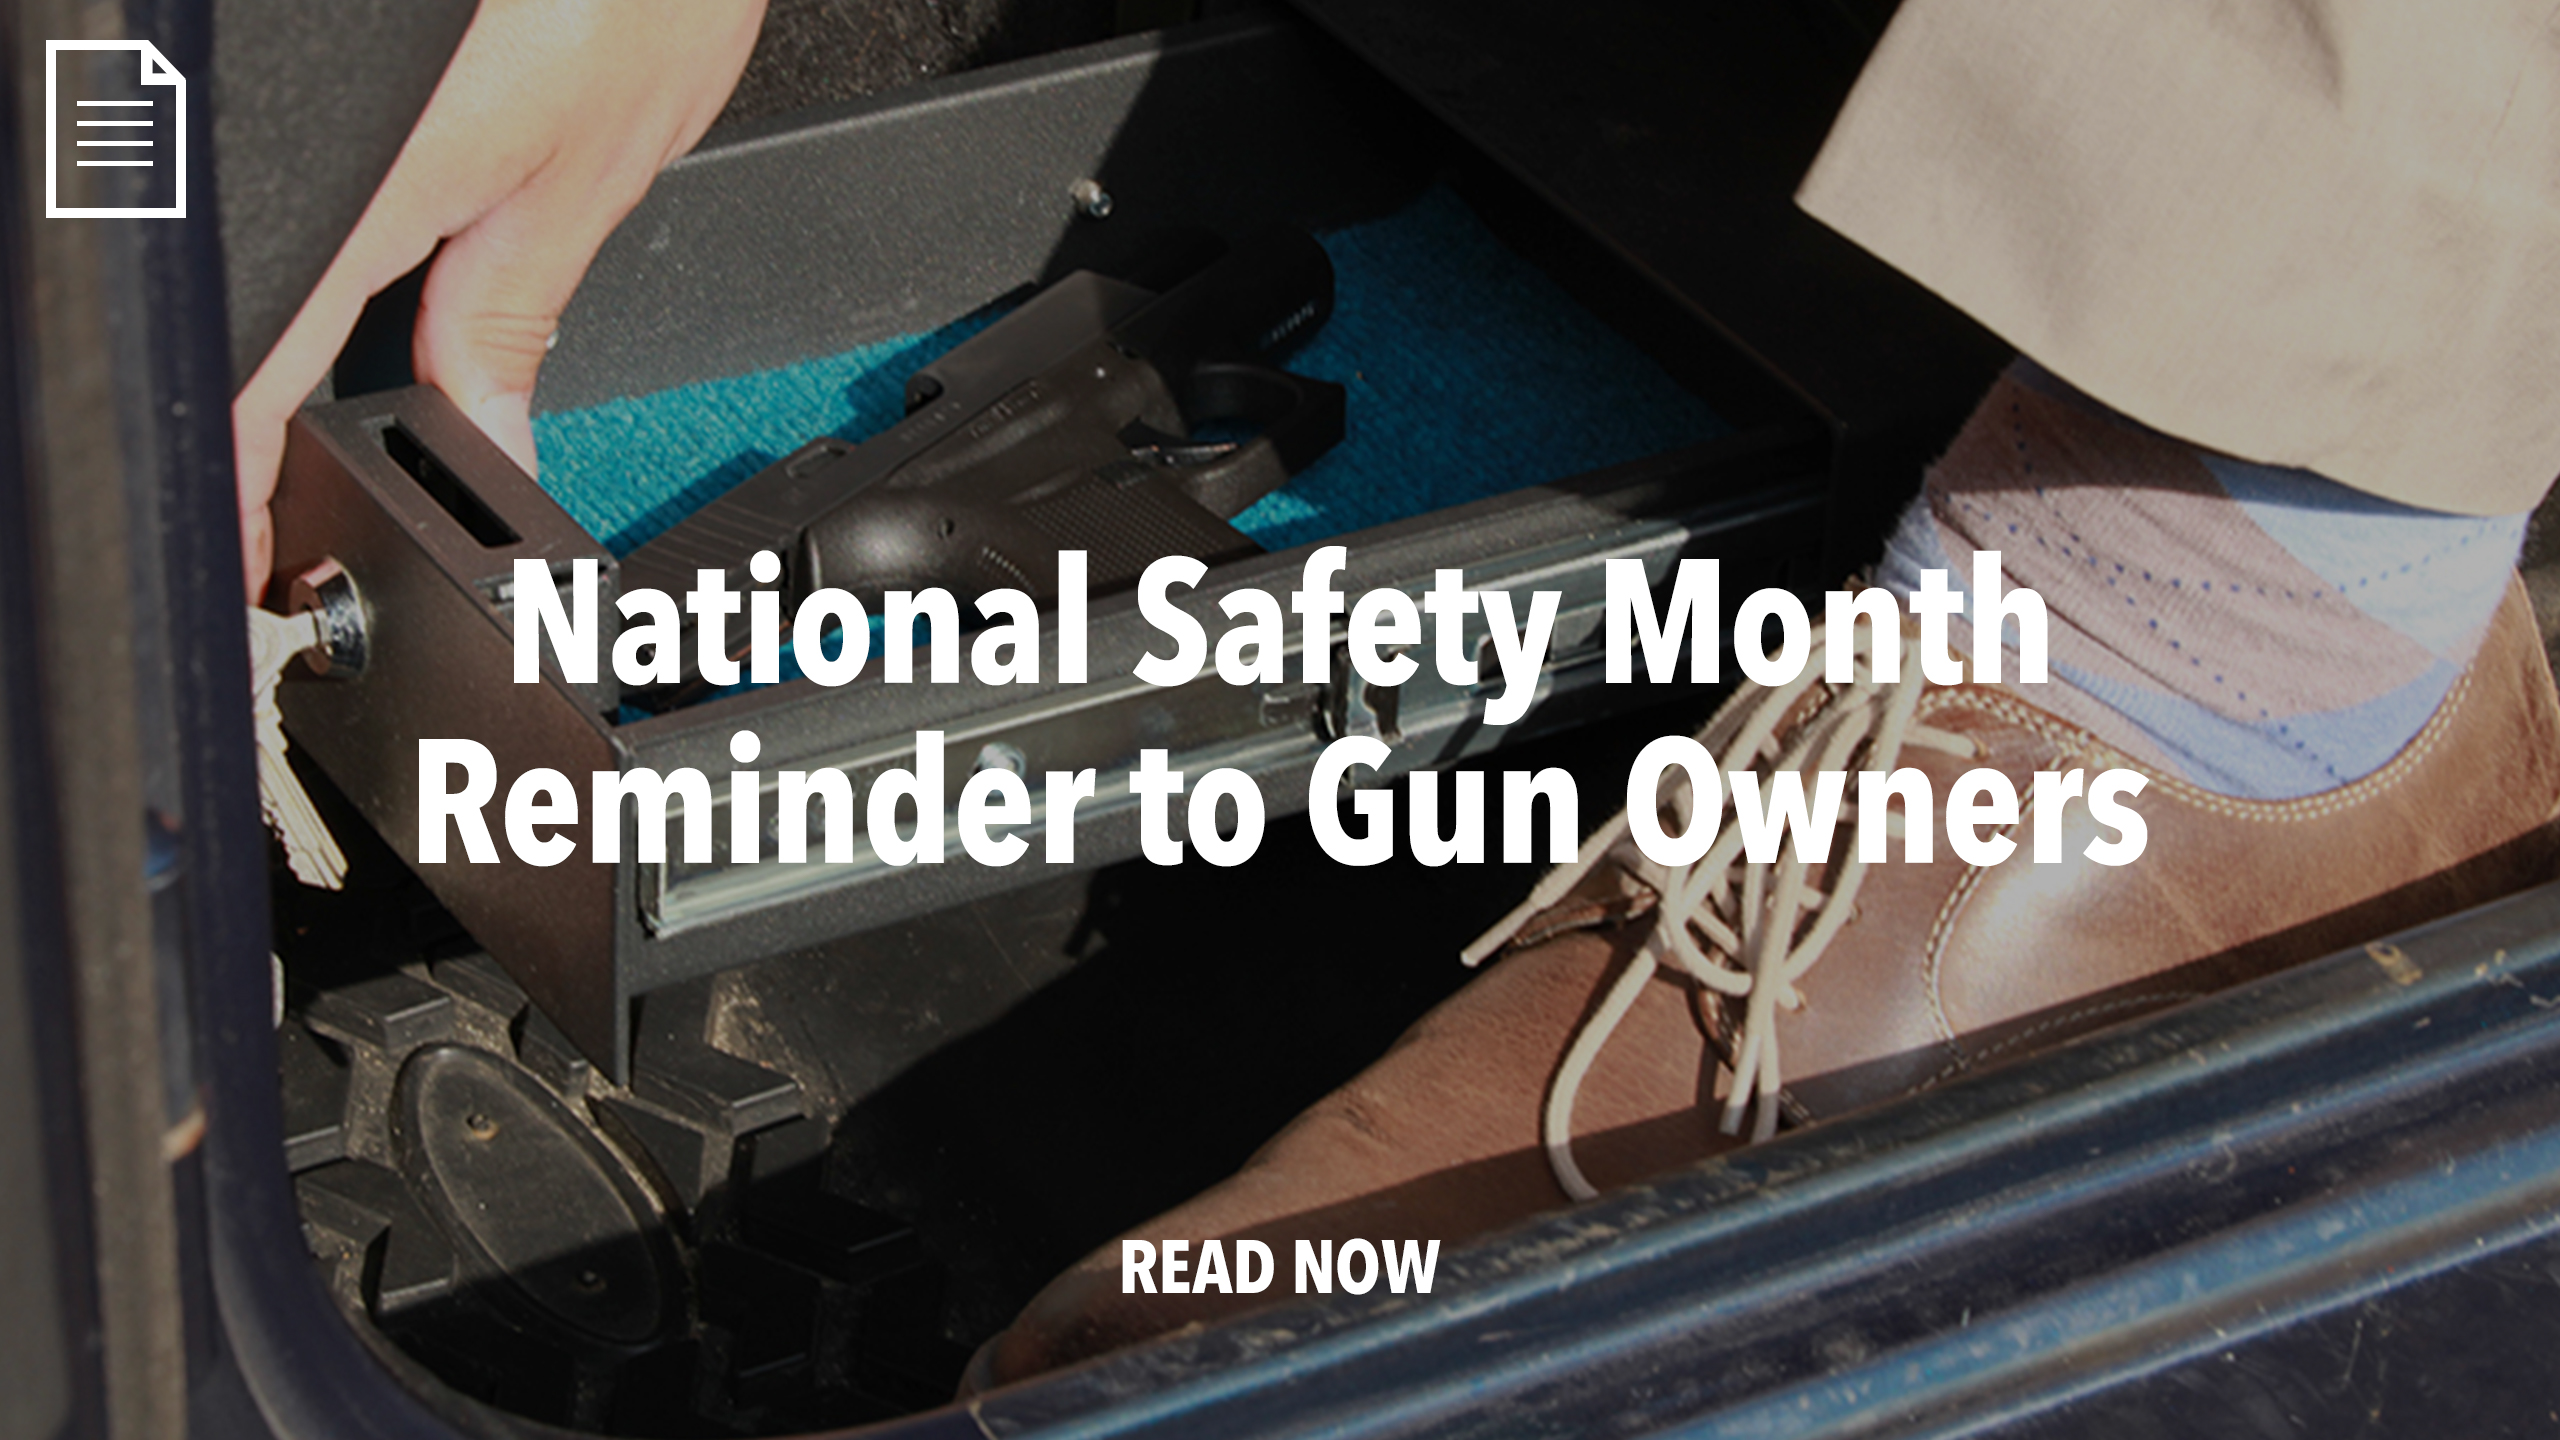 A National Safety Month Reminder to Gun Owners